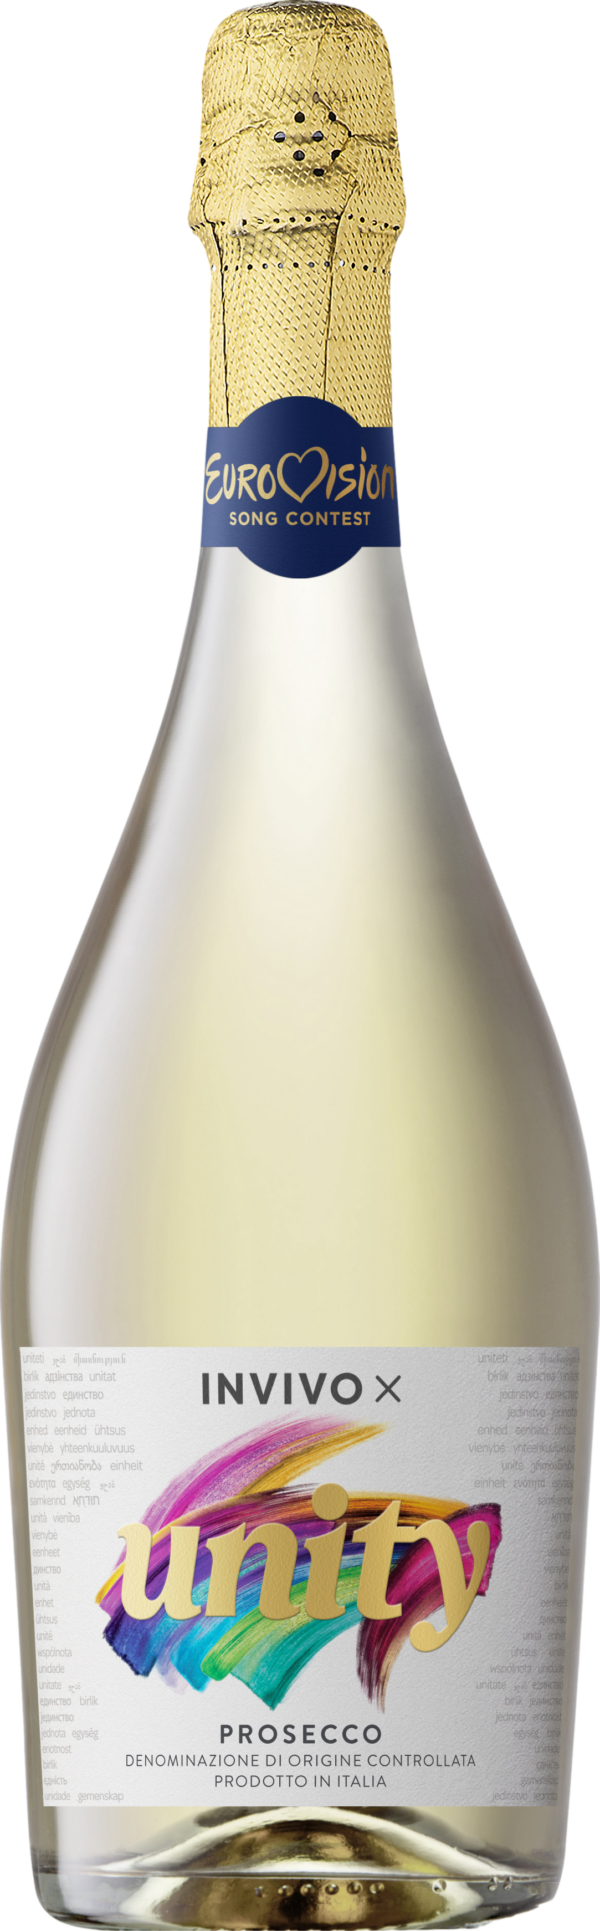 Product image of Invivo X Unity Prosecco from 8wines